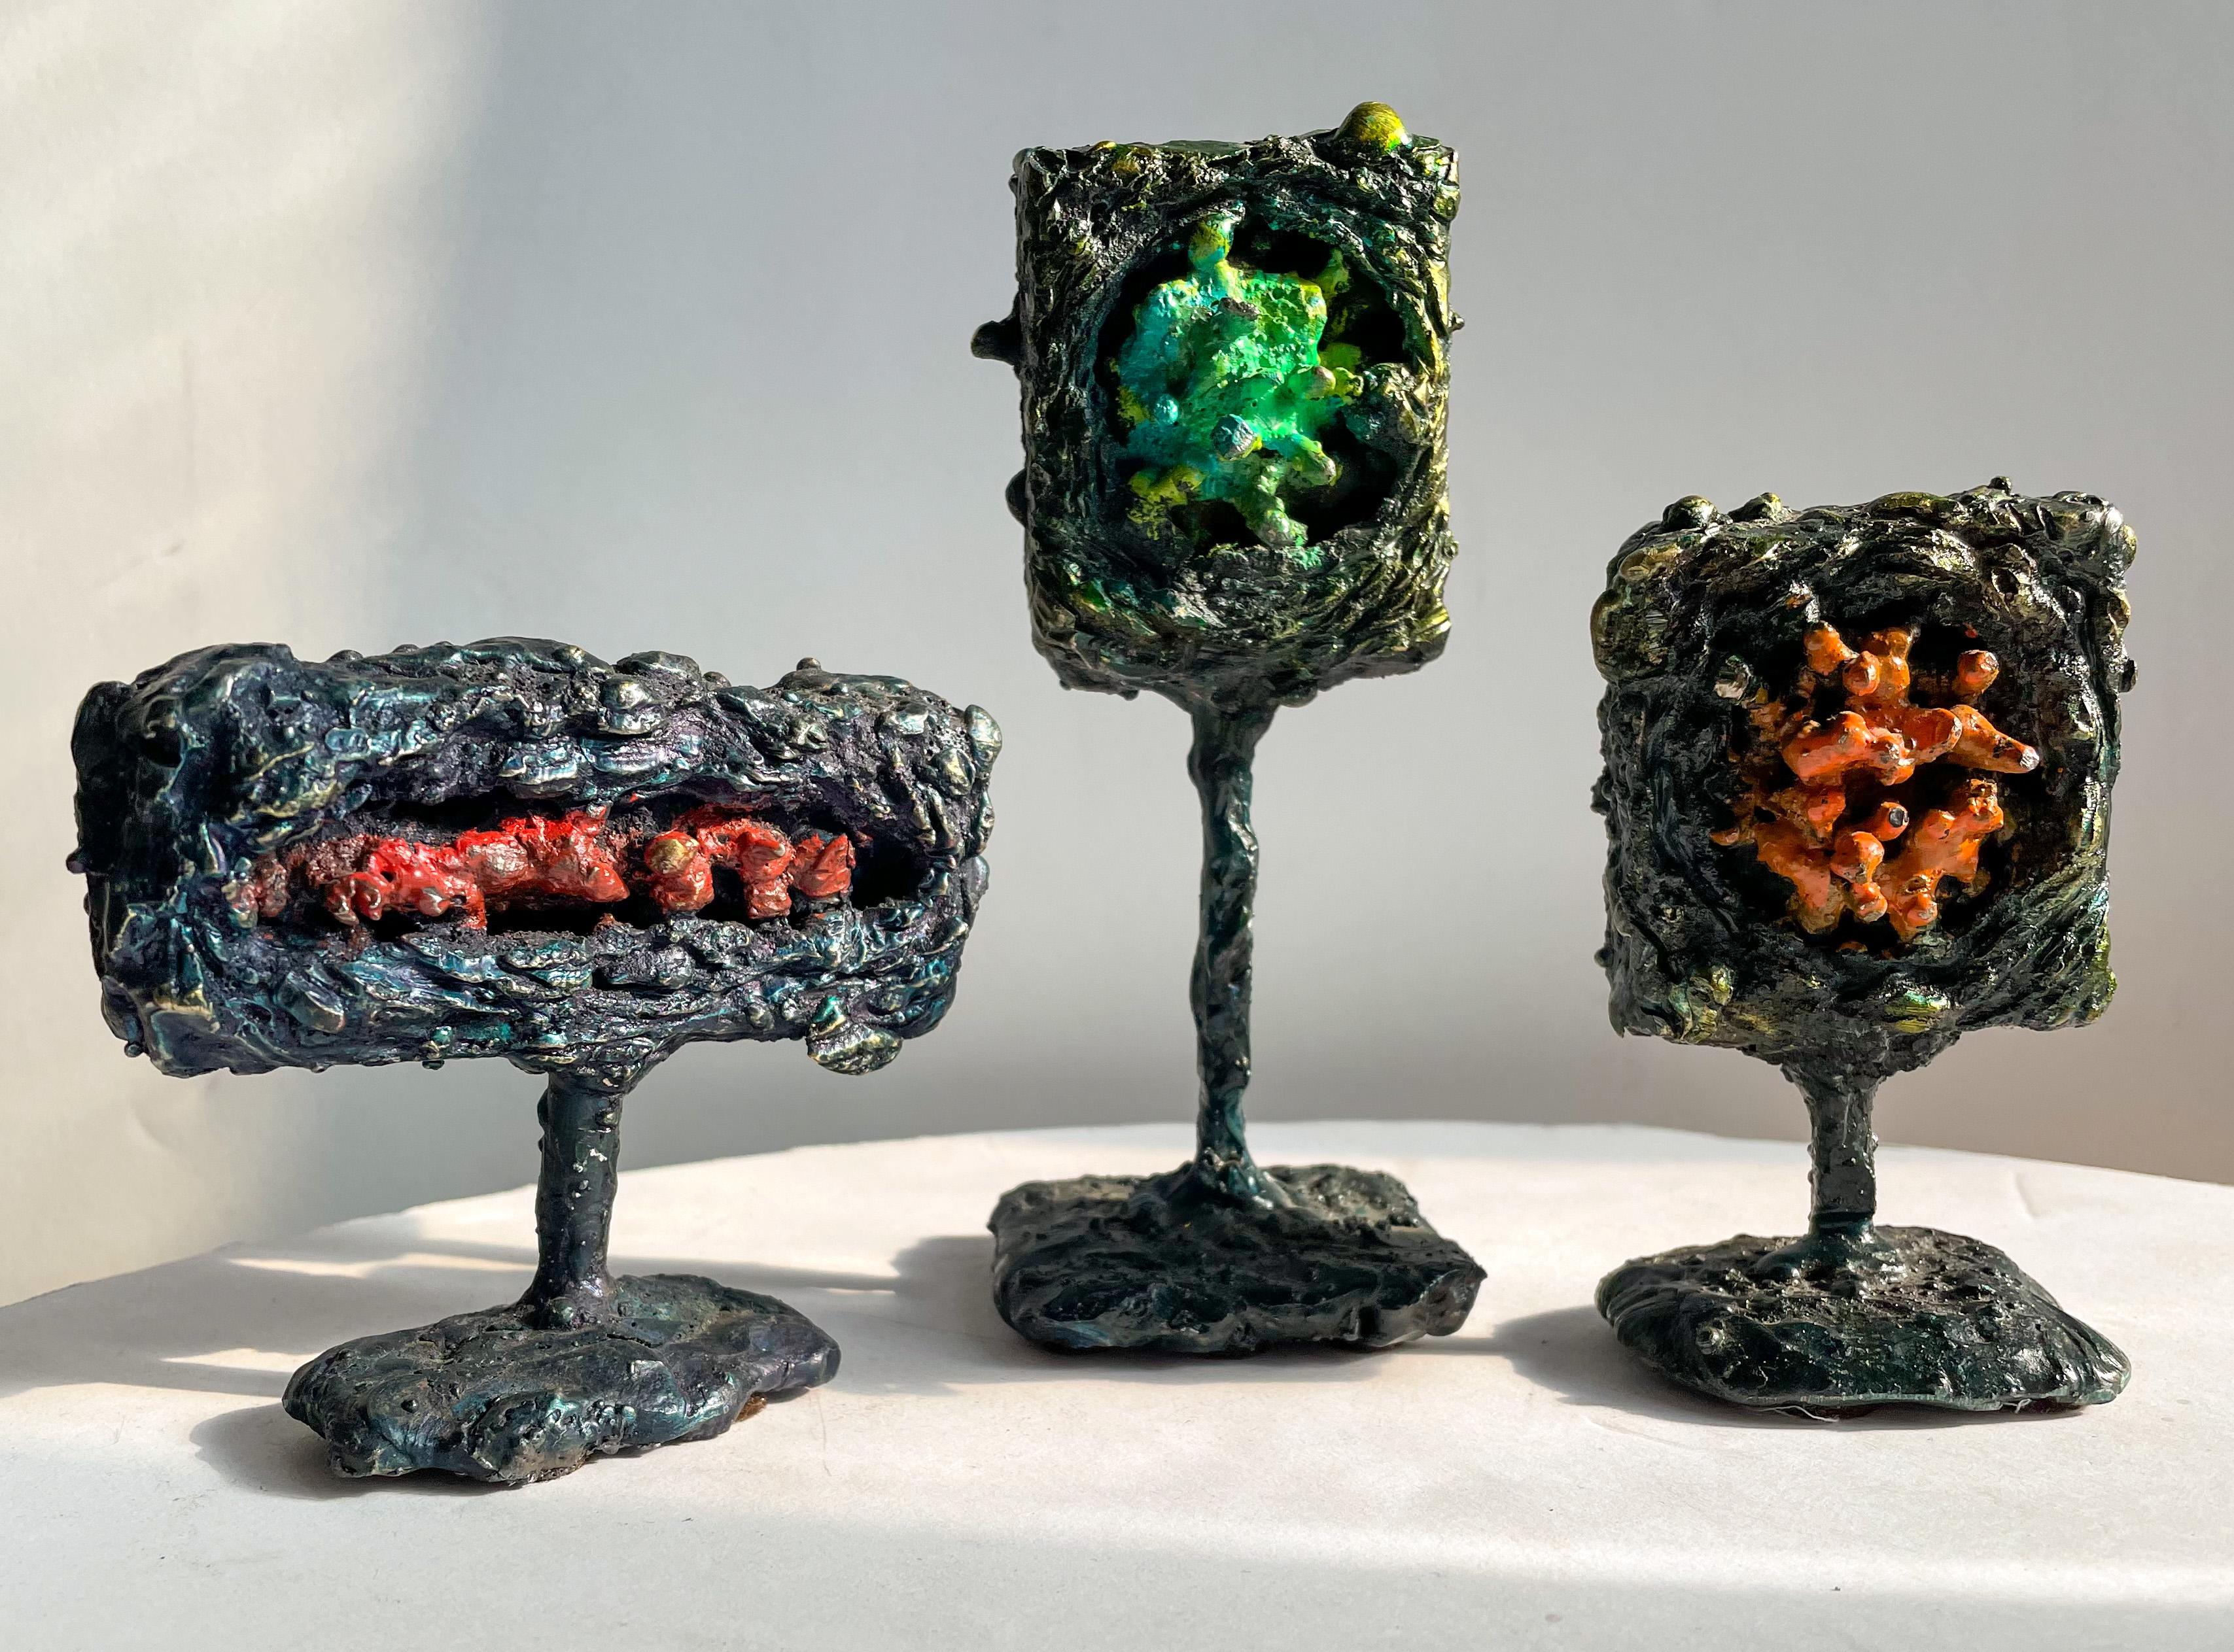 Group of three small abstract sculptures, titled Module Trio, of blackened steel, fused and dyed bronze, and glass enamel. Made in 2019 by American artist James Bearden. The three sculptures, each with a different brightly colored, molten-looking